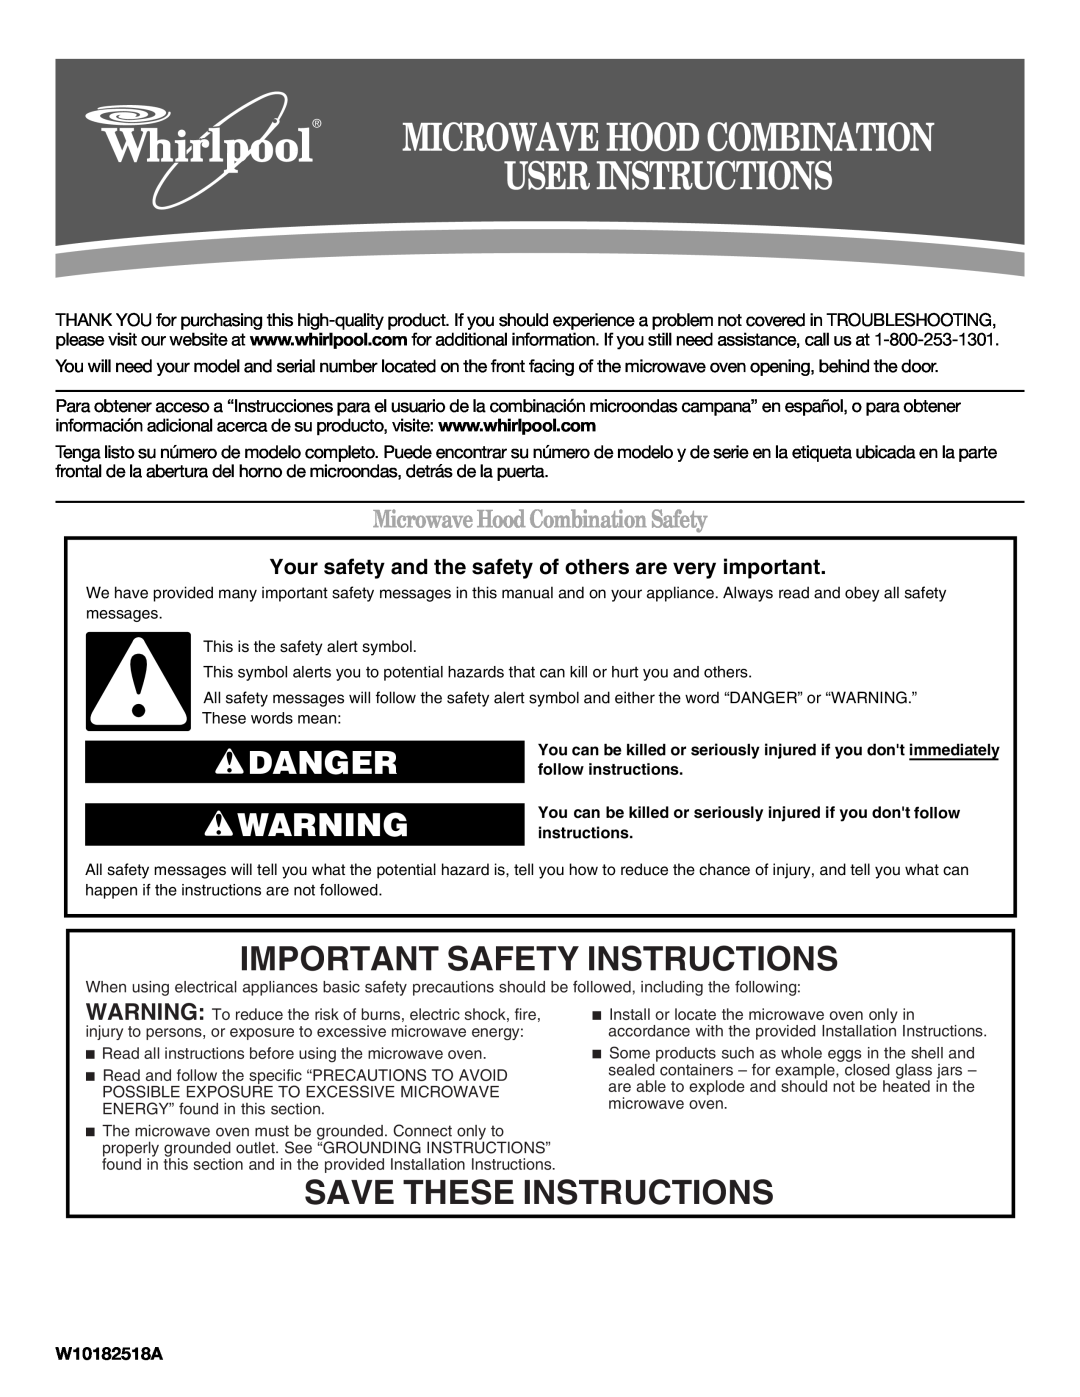 Whirlpool W10182518A Important Safety Instructions, Save These Instructions, Microwave Hood Combination Safety, Danger 